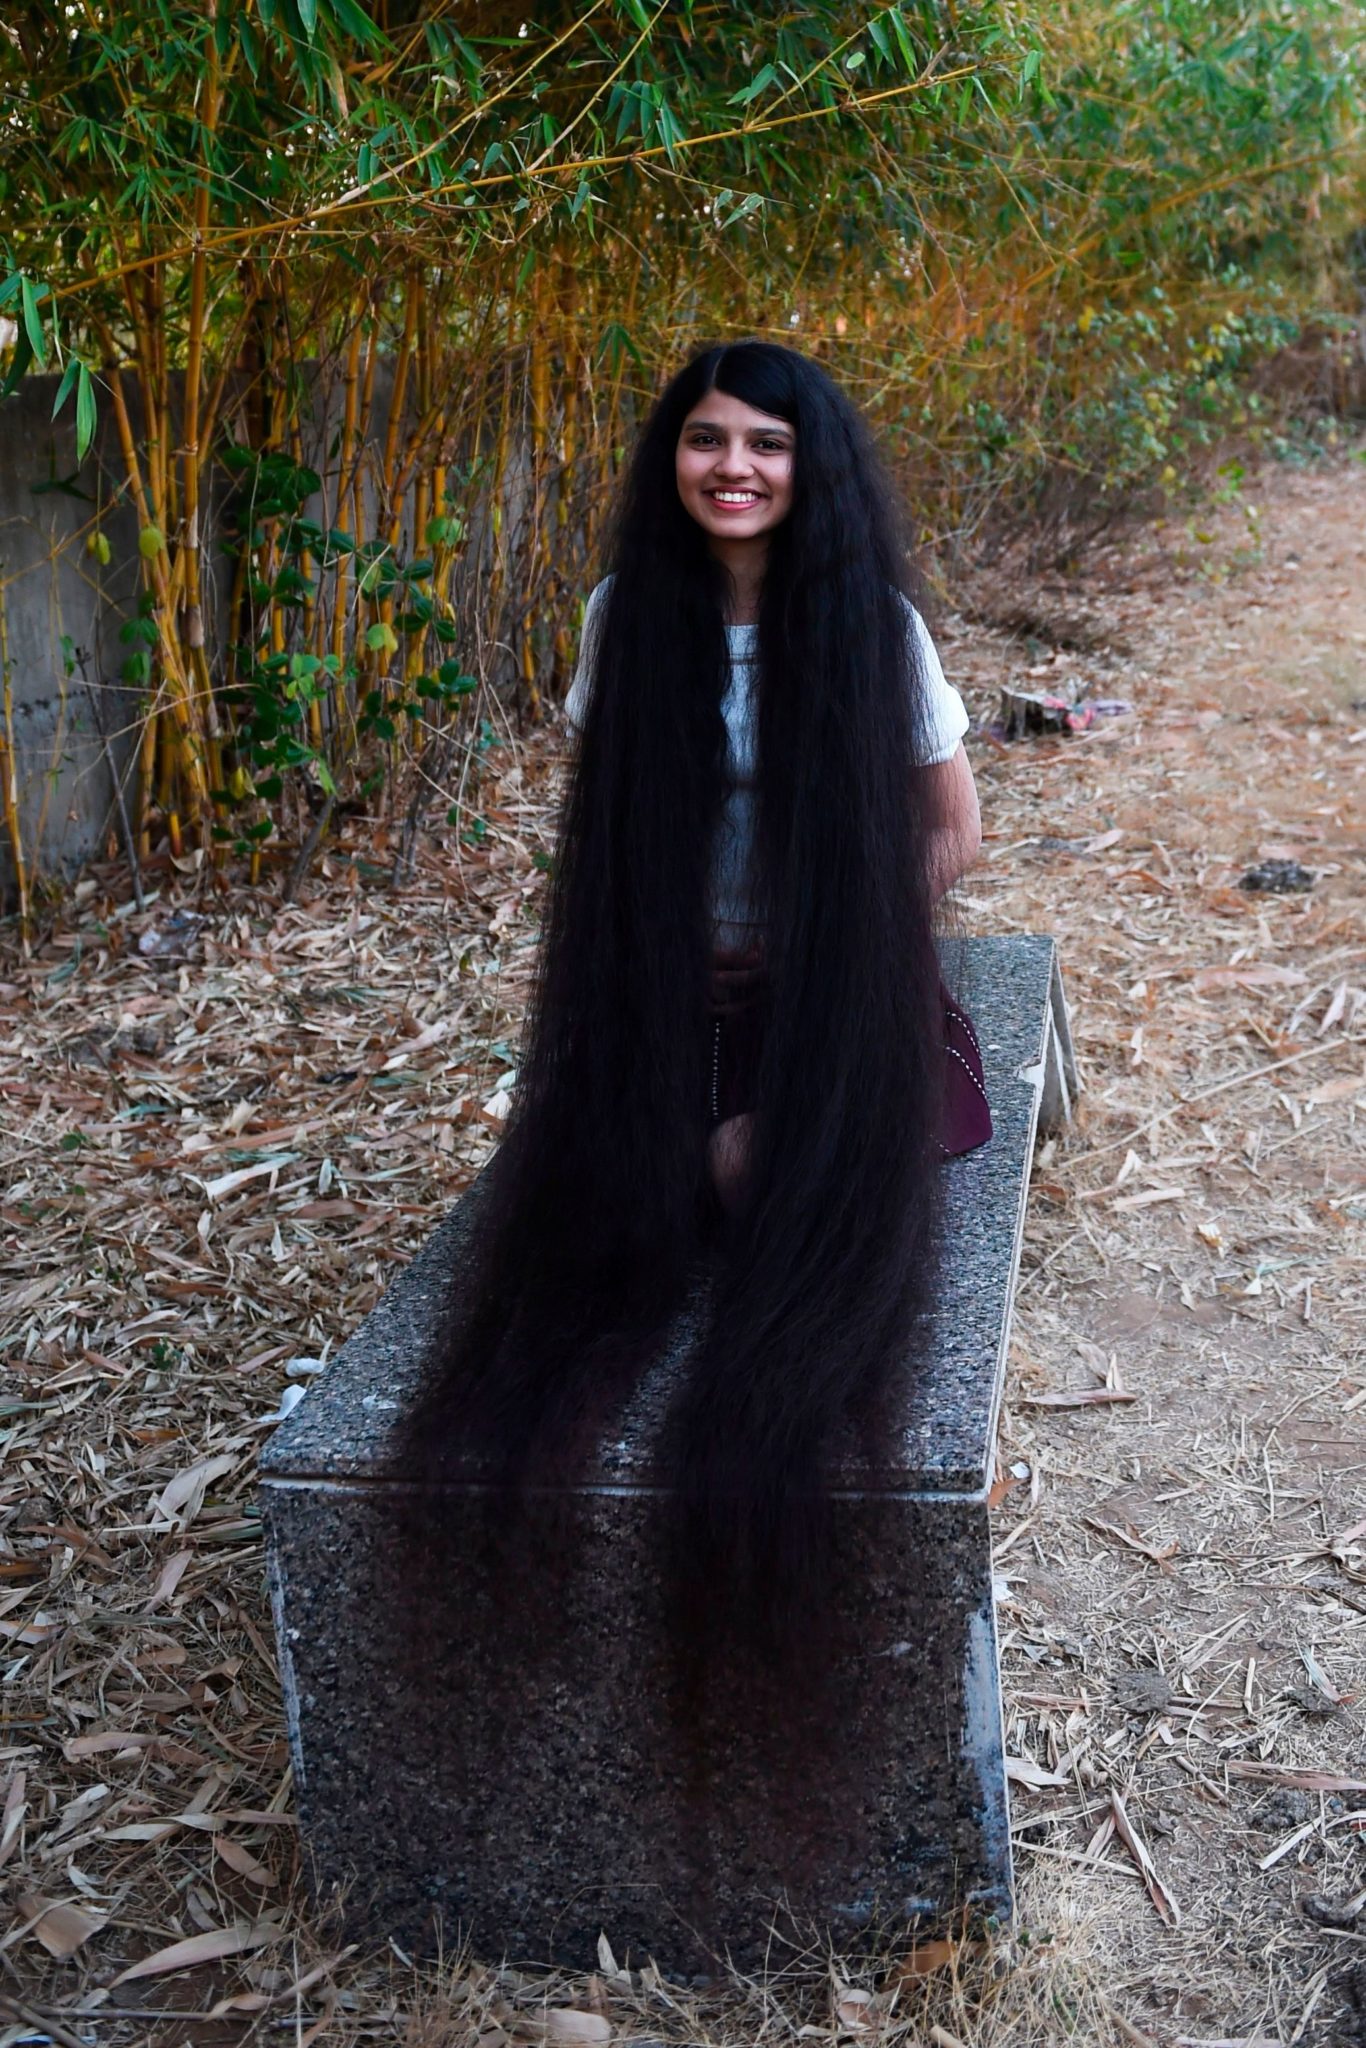 Indian Rapunzel Has the World's Longest Hair 11 Years Without a